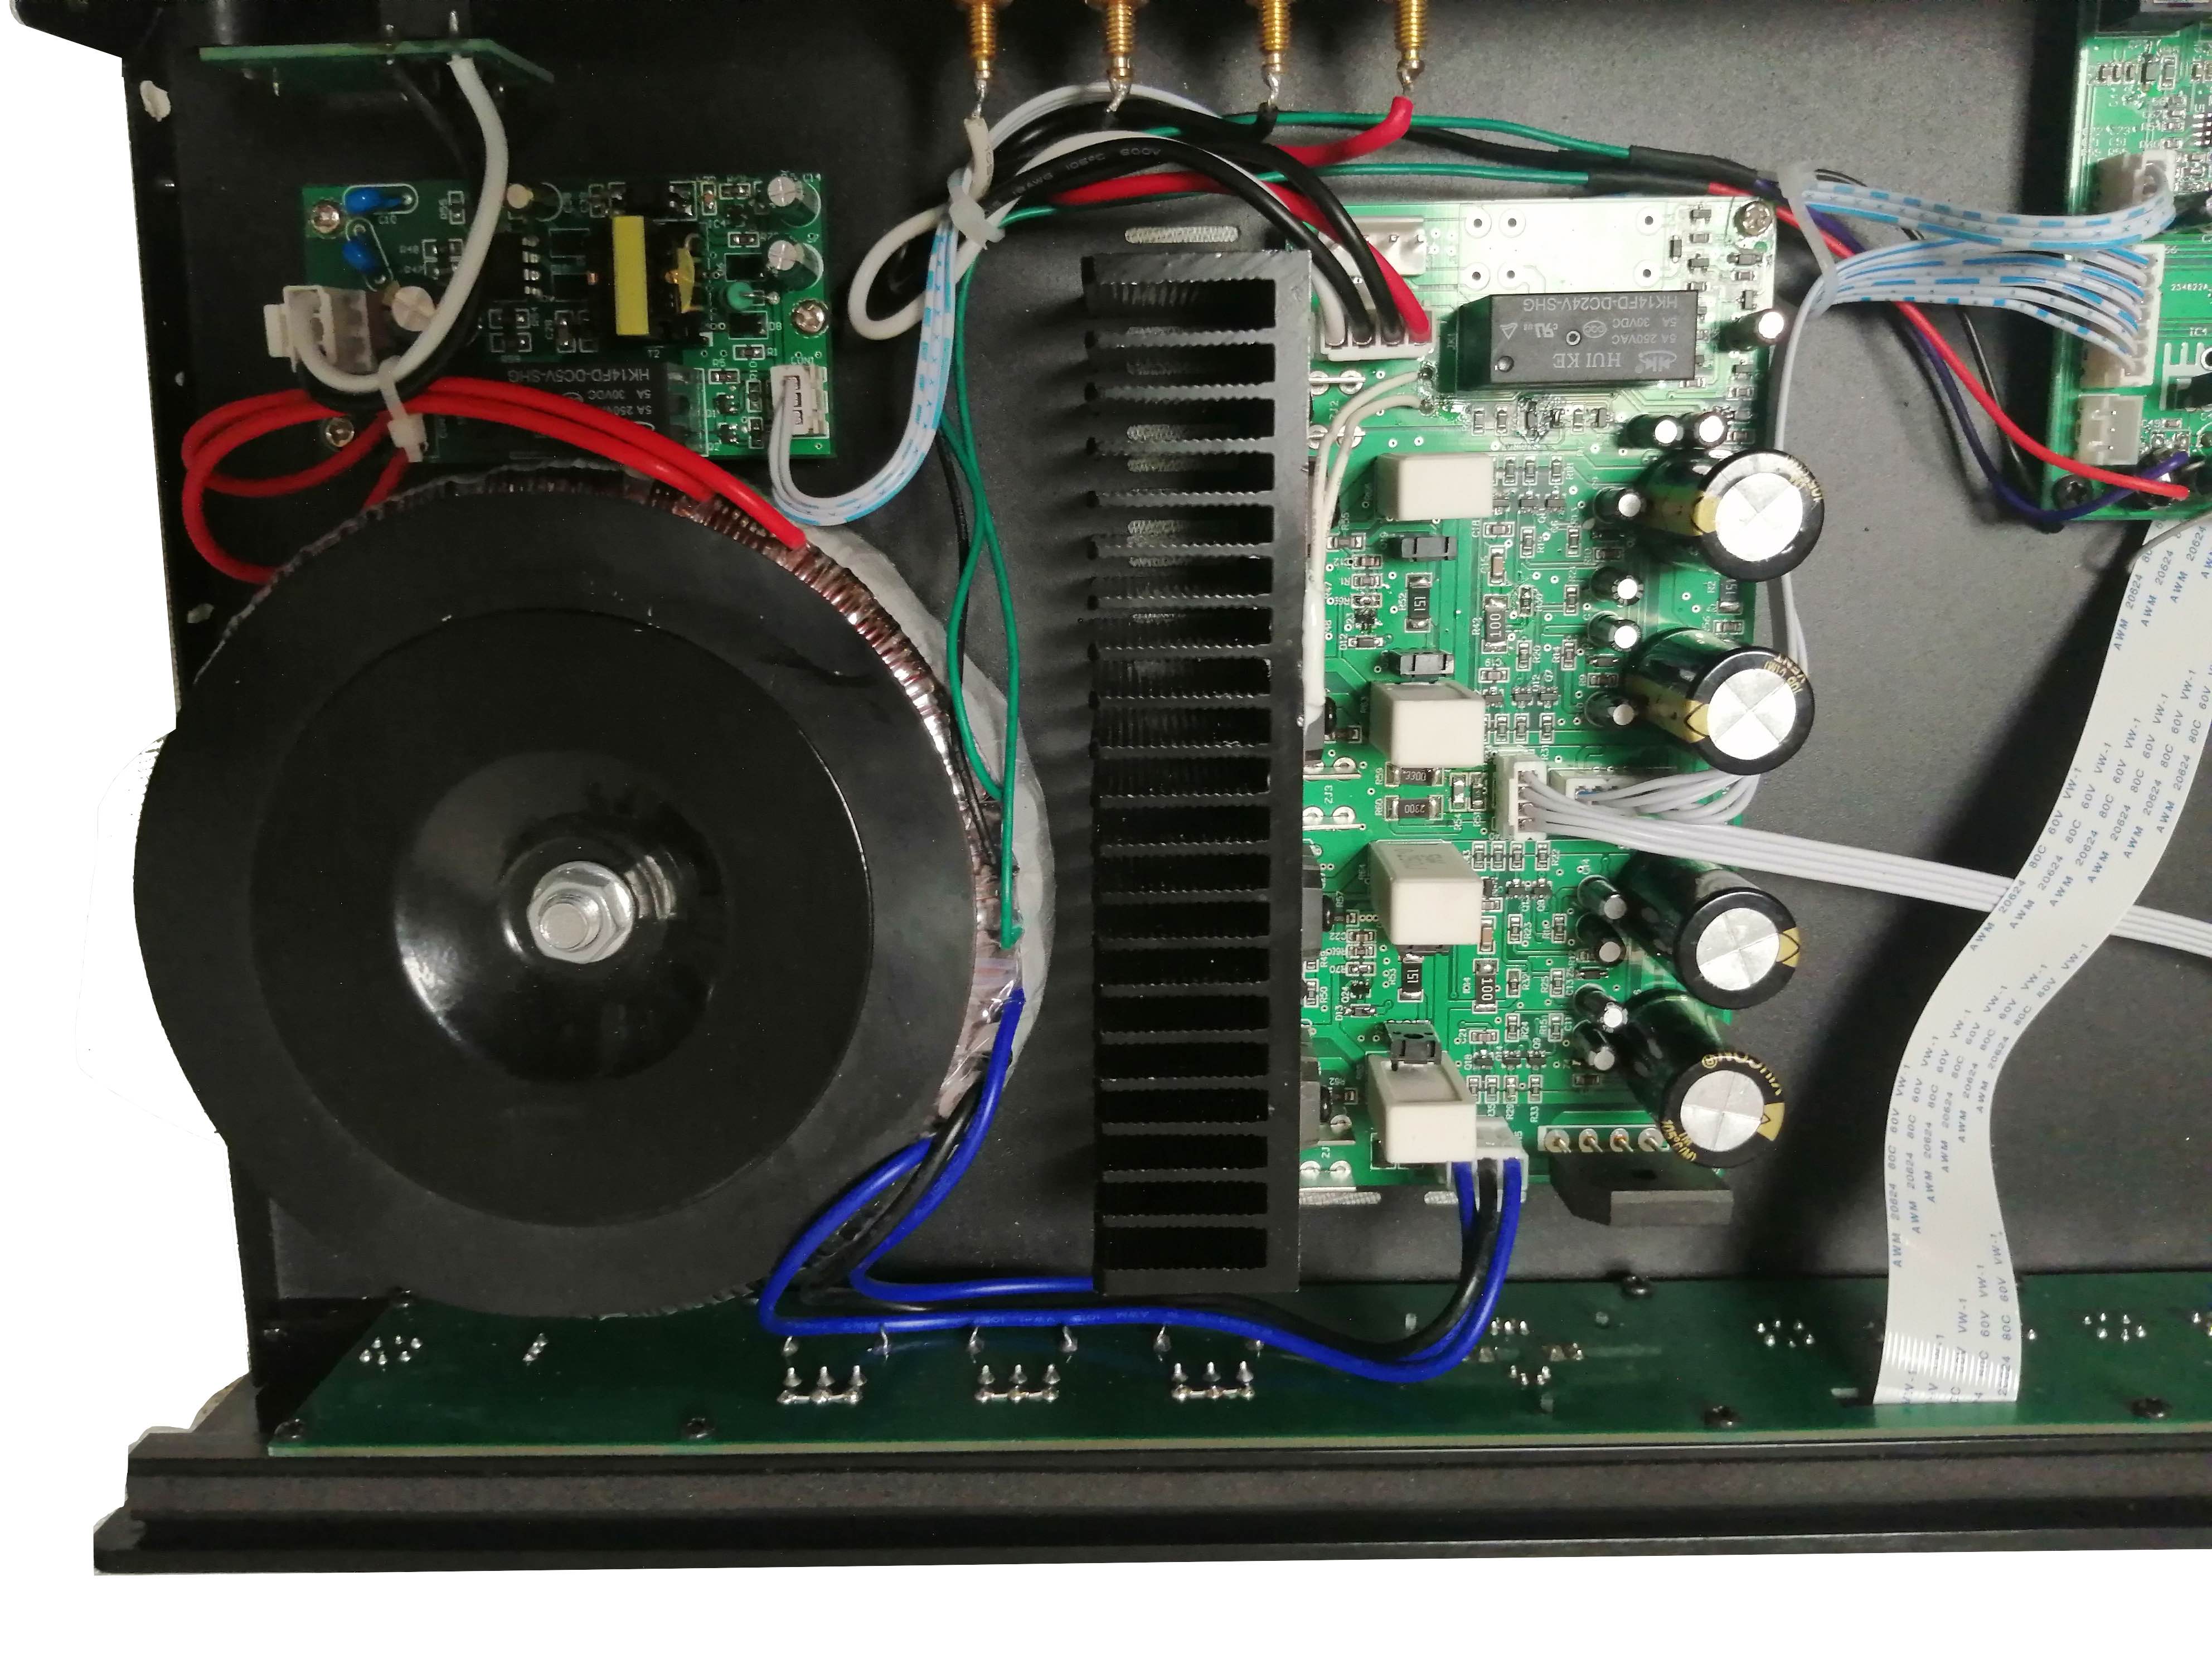 stereo amplifier for hifi system 